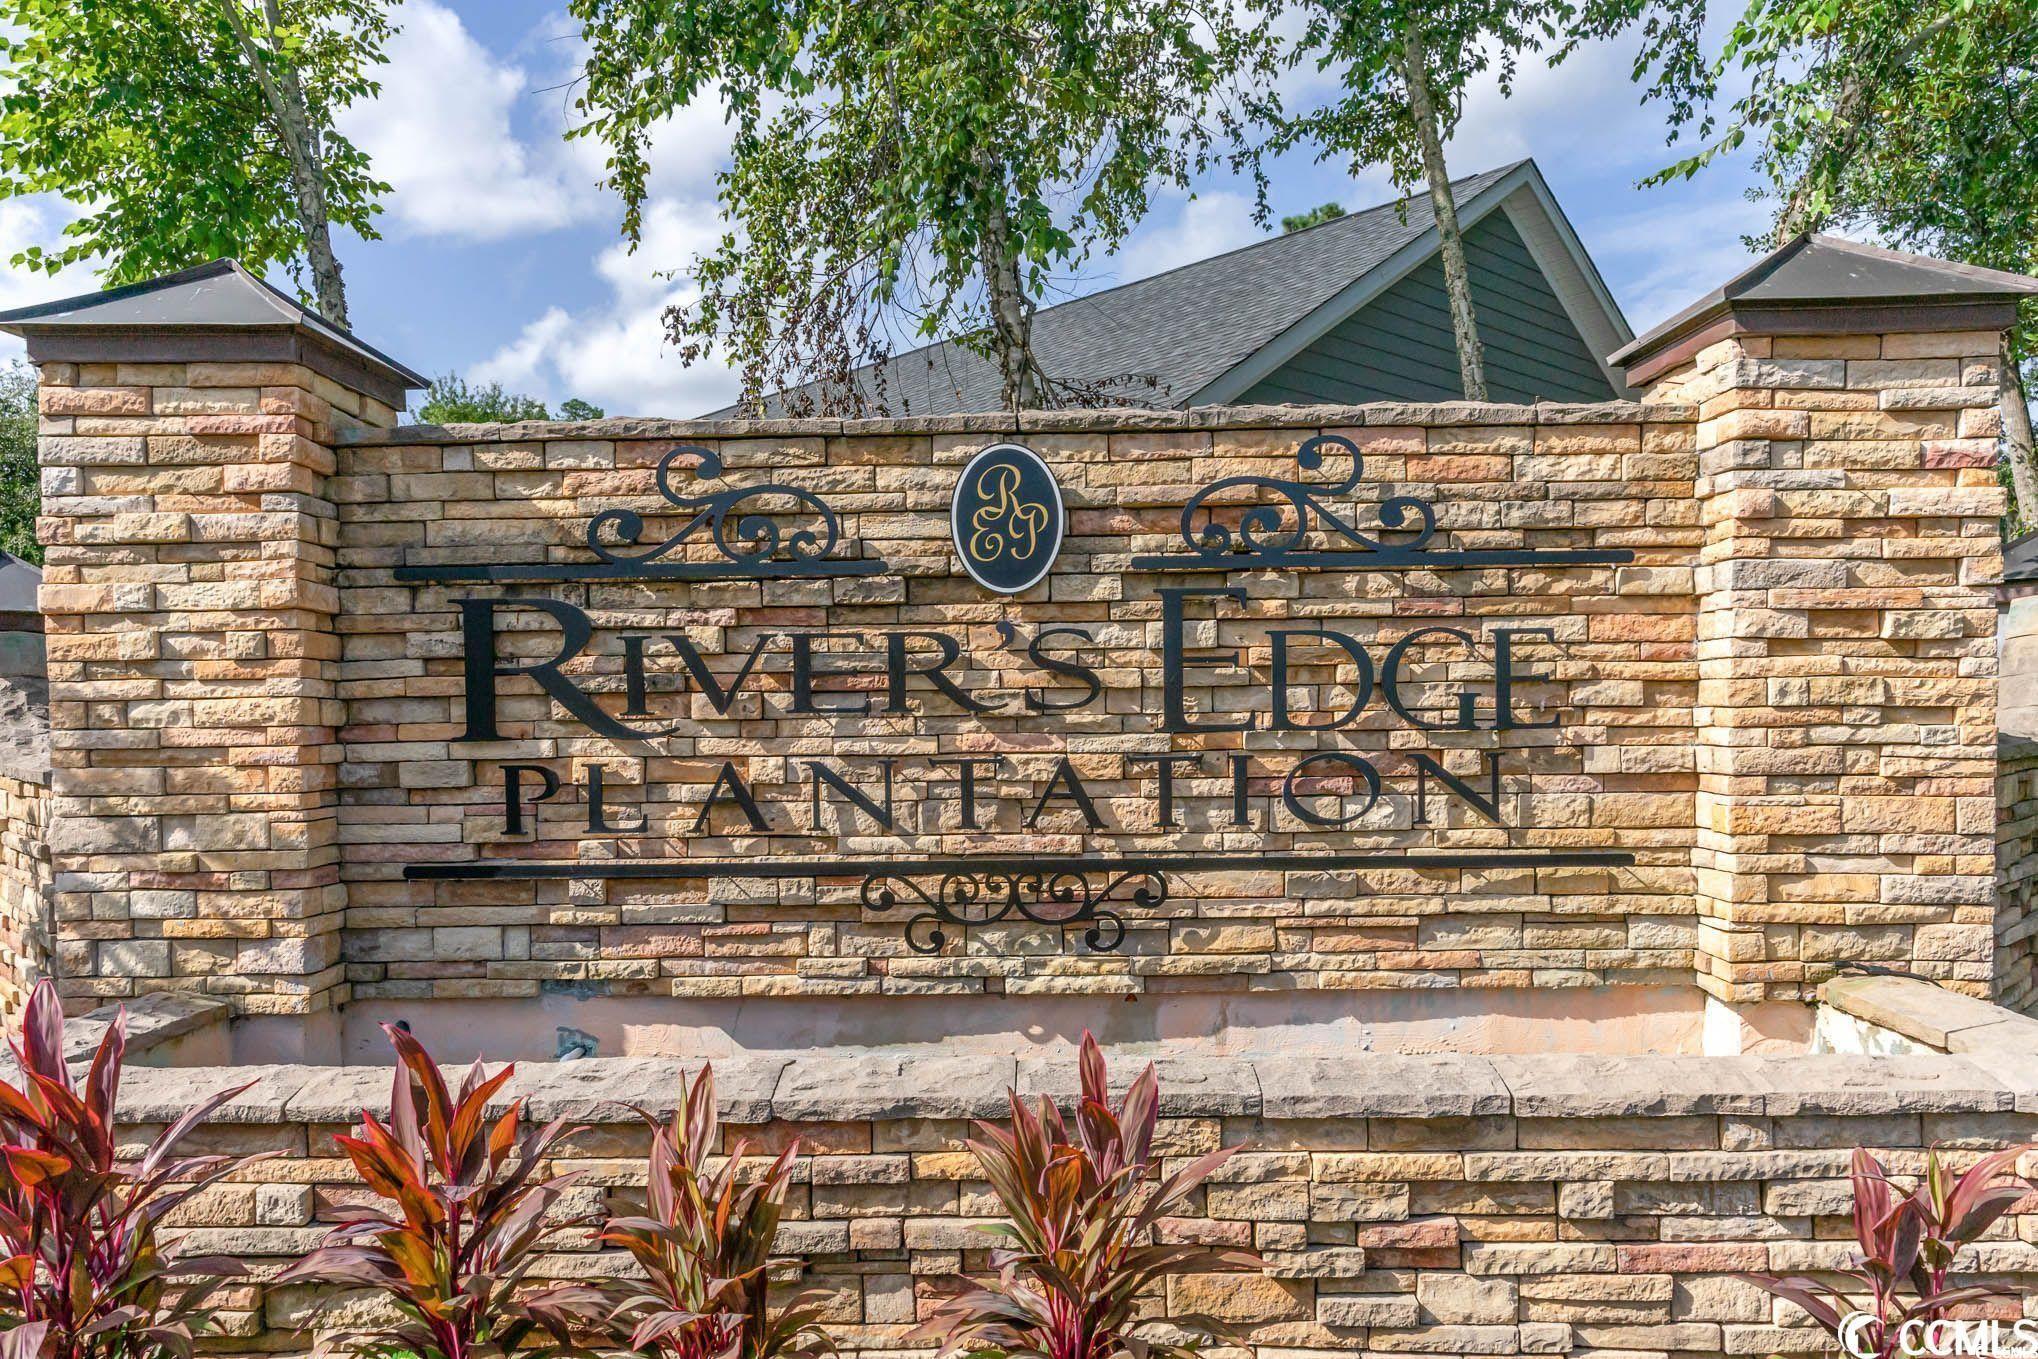 introducing rivers edge plantation, an idyllic blend of luxury and natural beauty. this remarkable custom-built home, nestled on a private .52-acre lot, showcases exceptional craftsmanship and contemporary design. boasting 3 bedrooms, 2 full bathrooms, 1 half bath and 3 car garage plus 1,804 sq. ft. of unfinished basement this expansive residence promises a refined and comfortable lifestyle for you and your loved ones. set within a private gated community, the house enjoys proximity to a private boat ramp for waccamaw river access and a neighborhood swimming pool.  step inside to discover an open and inviting floor plan, where style seamlessly merges with practicality. the grand foyer leads to the heart of the home—a beautiful kitchen that epitomizes a chef's dream. equipped with stainless steel appliances, custom cabinetry, and a central island, it's perfect for culinary enthusiasts.  outside, the vast backyard becomes your personal sanctuary. enveloped by lush landscaping, this private haven invites you to revel in outdoor gatherings, indulge in gardening, or savor the serene surroundings.  positioned within the highly sought-after rivers edge plantation community, renowned for its picturesque beauty, this home effortlessly combines the best of both worlds. embrace nature's tranquility with easy access to nearby parks, walking trails, and the scenic riverfront. and when you crave city amenities, a quick drive brings you to an array of shopping, dining, and entertainment options.  this extraordinary custom-built home is not to be missed. luxurious features like vaulted ceilings with integrated lighting, shiplap accent wall elevate the modern living experience. seize this opportunity to make this home yours, and be prepared for a lifetime of cherished moments in this exquisite rivers edge plantation residence. schedule your private showing today and embark on a journey of blissful living.